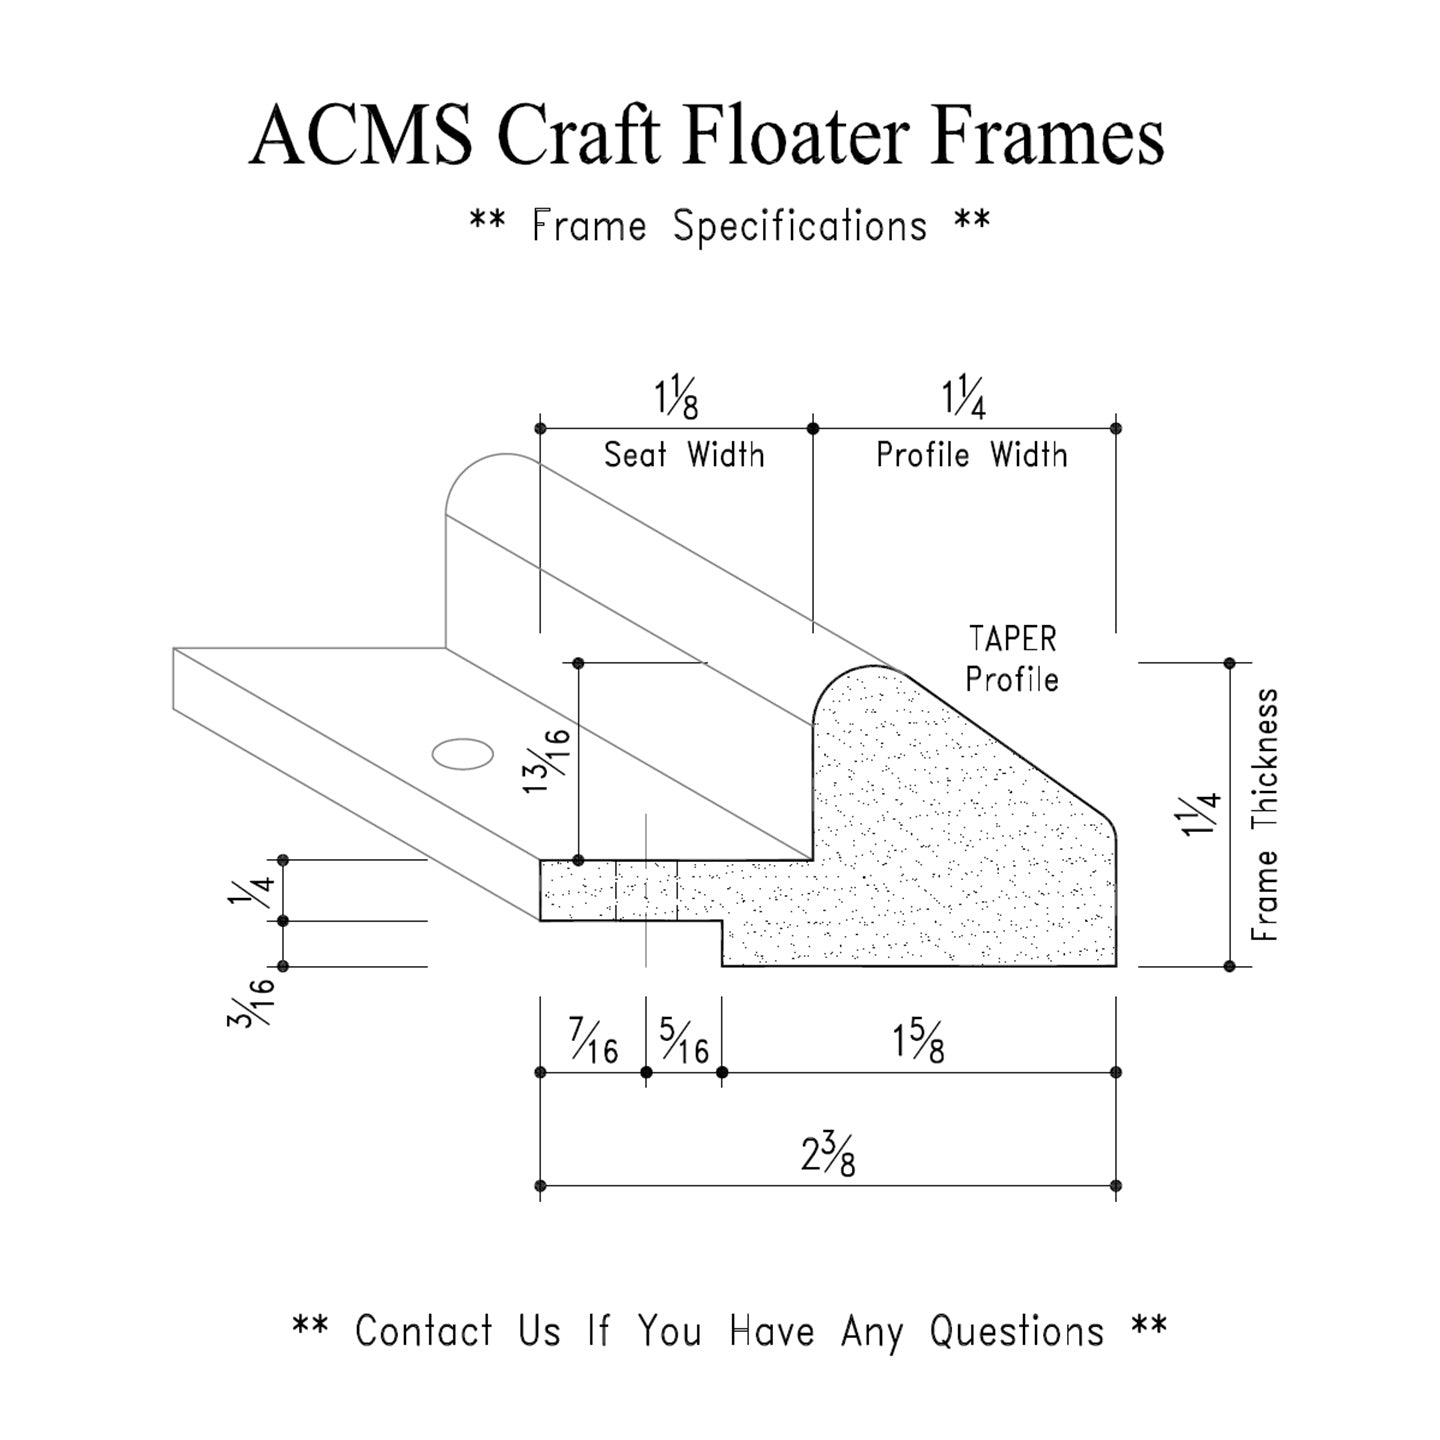 ACMS Oval Craft Floater Frame - For 3/4" Thick Artwork - Profile 1 1/4" TAPER - 1 1/4" Thick Frame